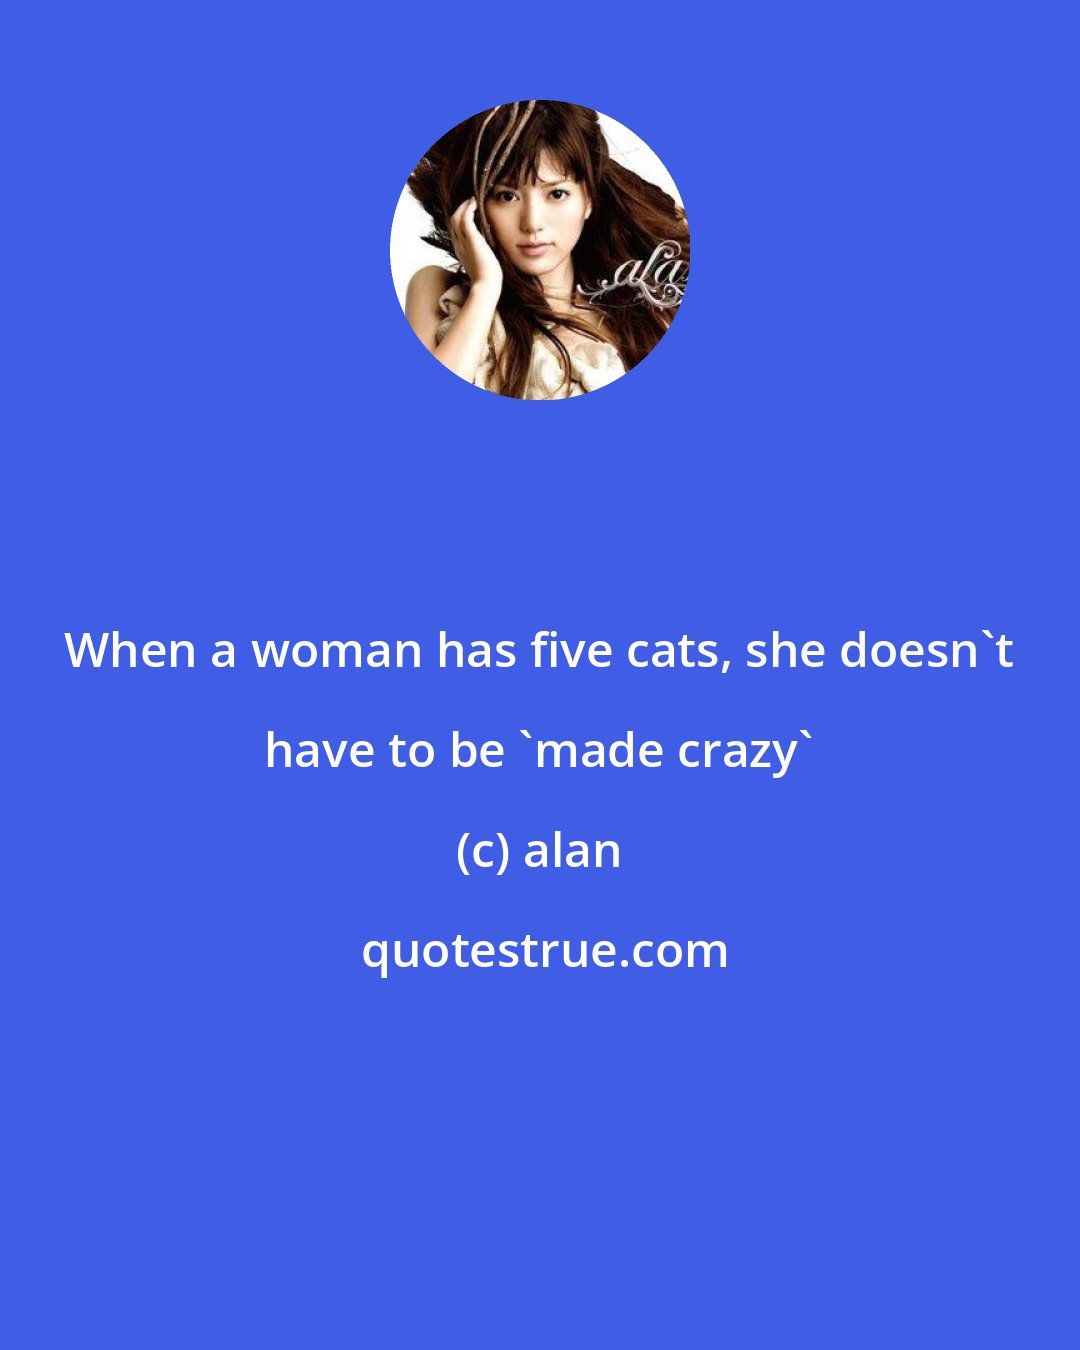 alan: When a woman has five cats, she doesn't have to be 'made crazy'